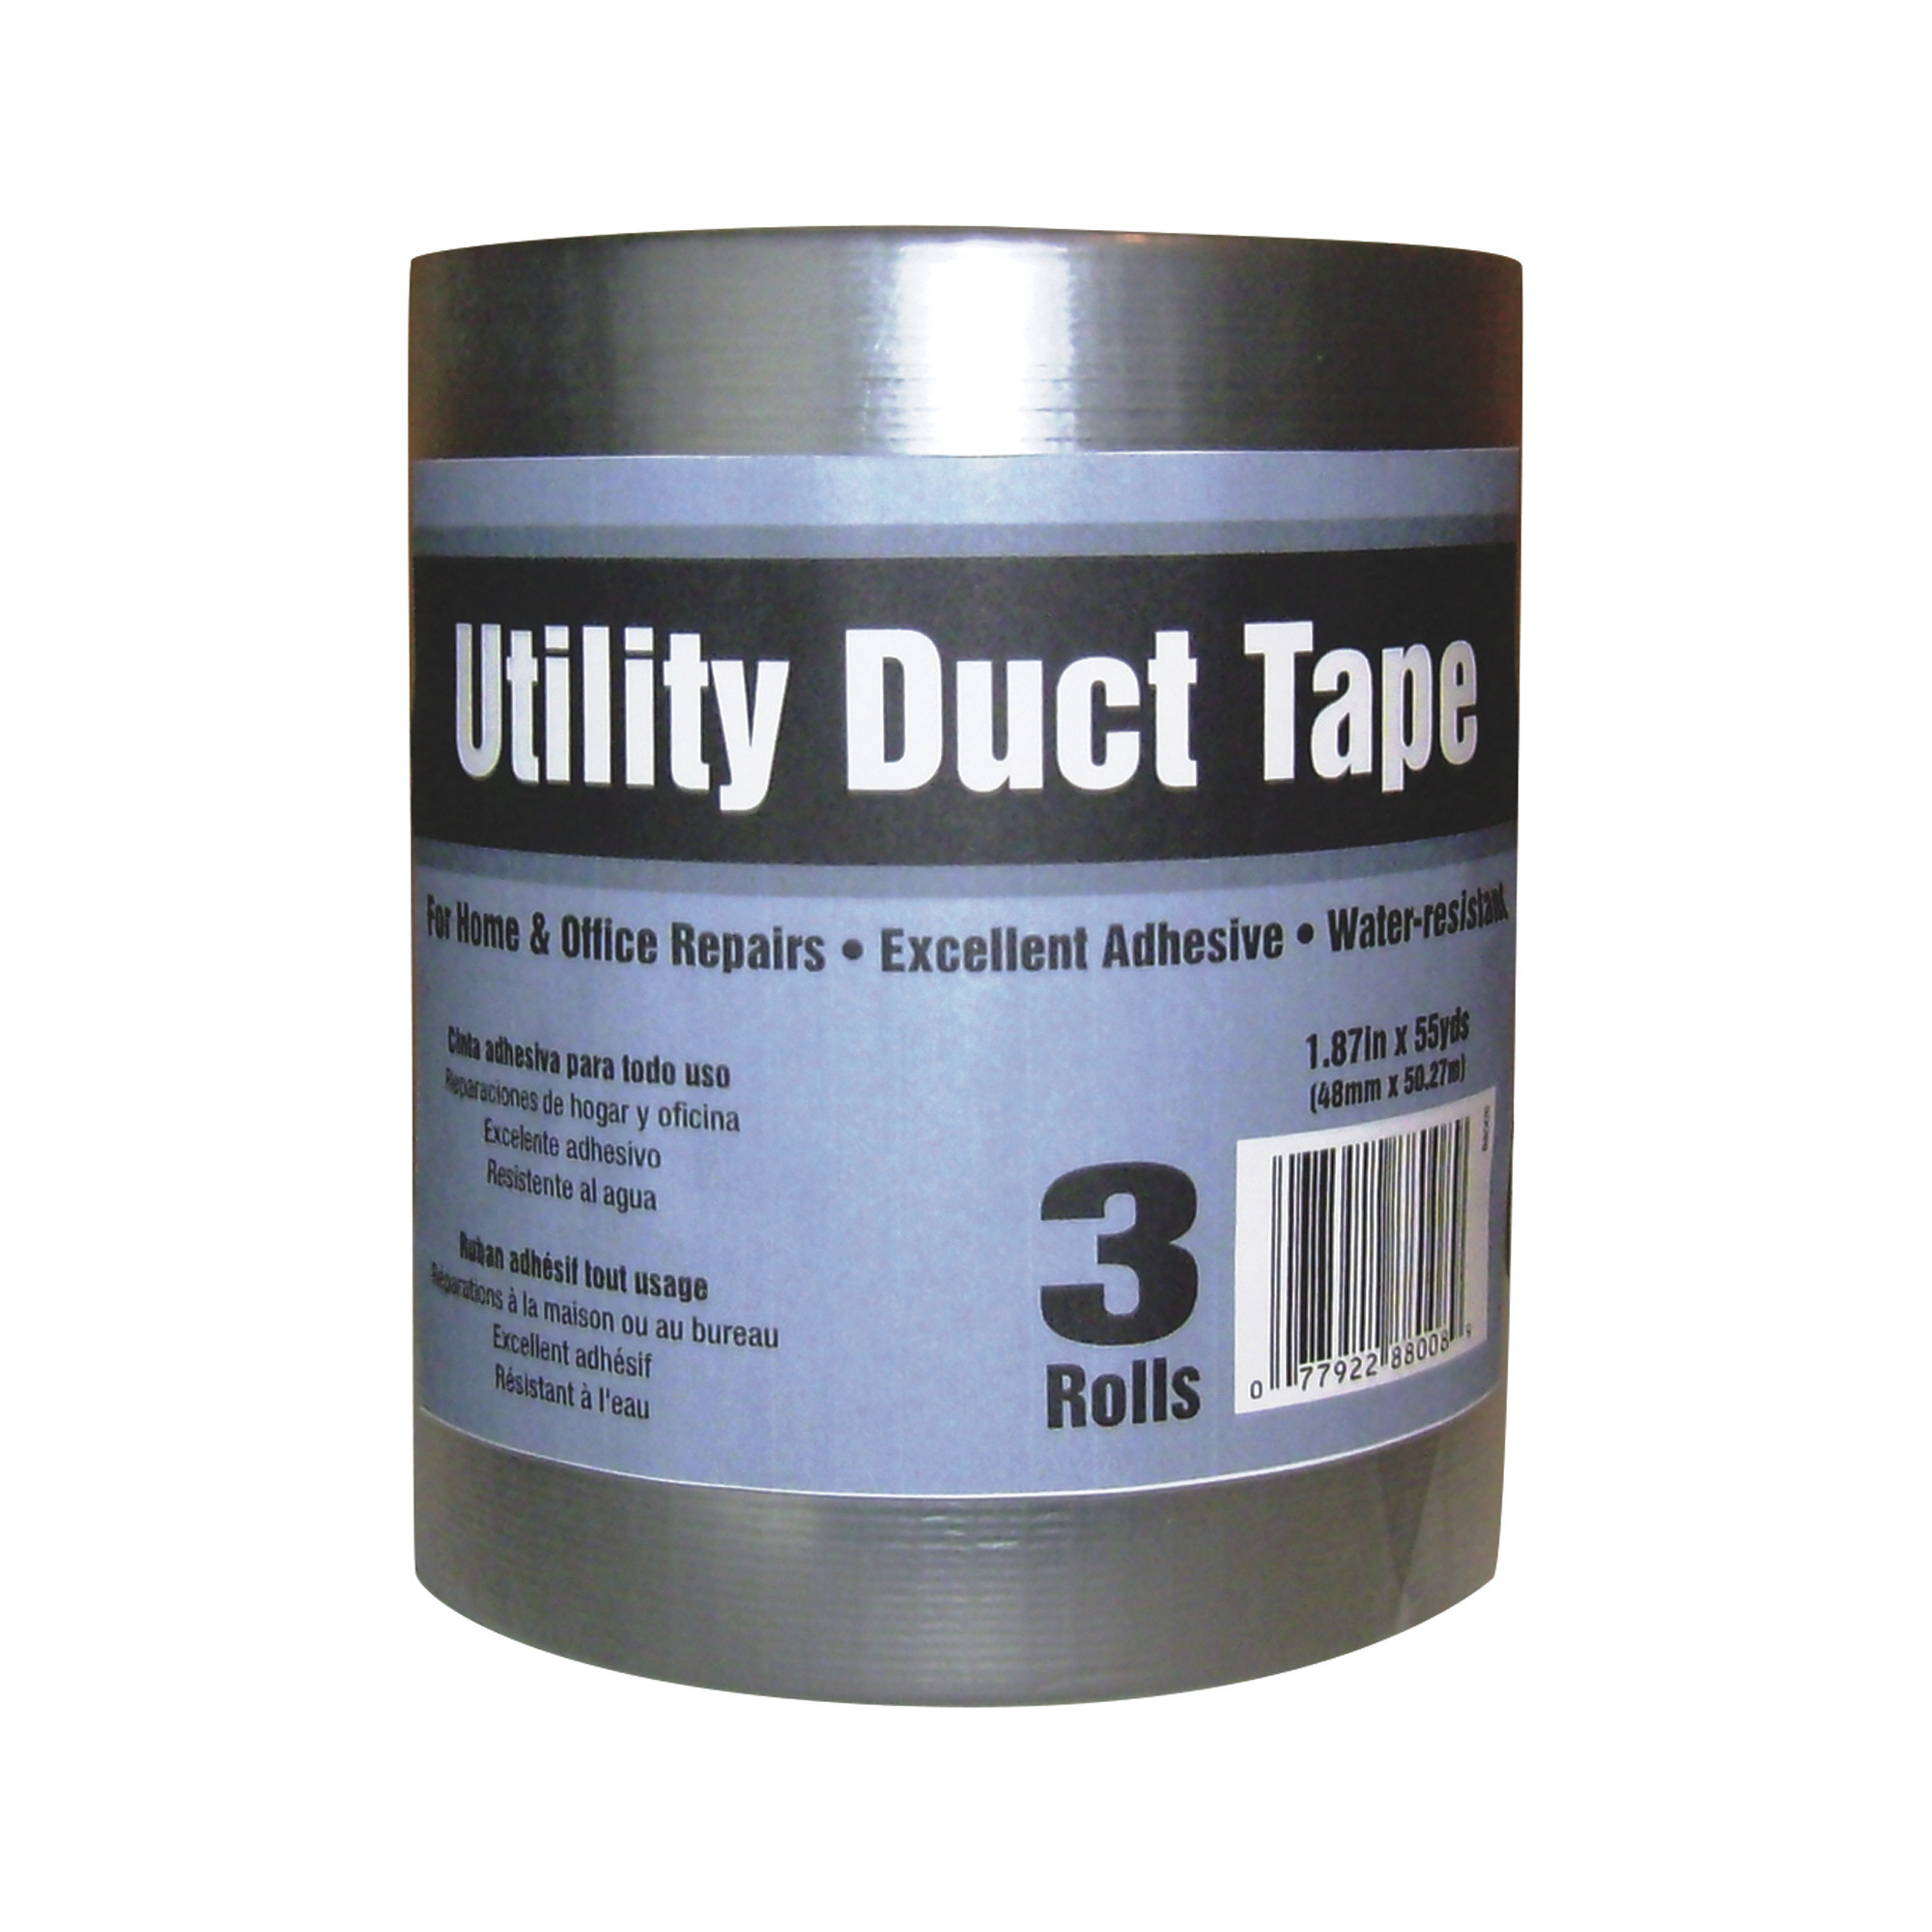 IPG Utility Duct Tape â 3-Pack, 1.88Inch W x 55 Yards, Model 88008